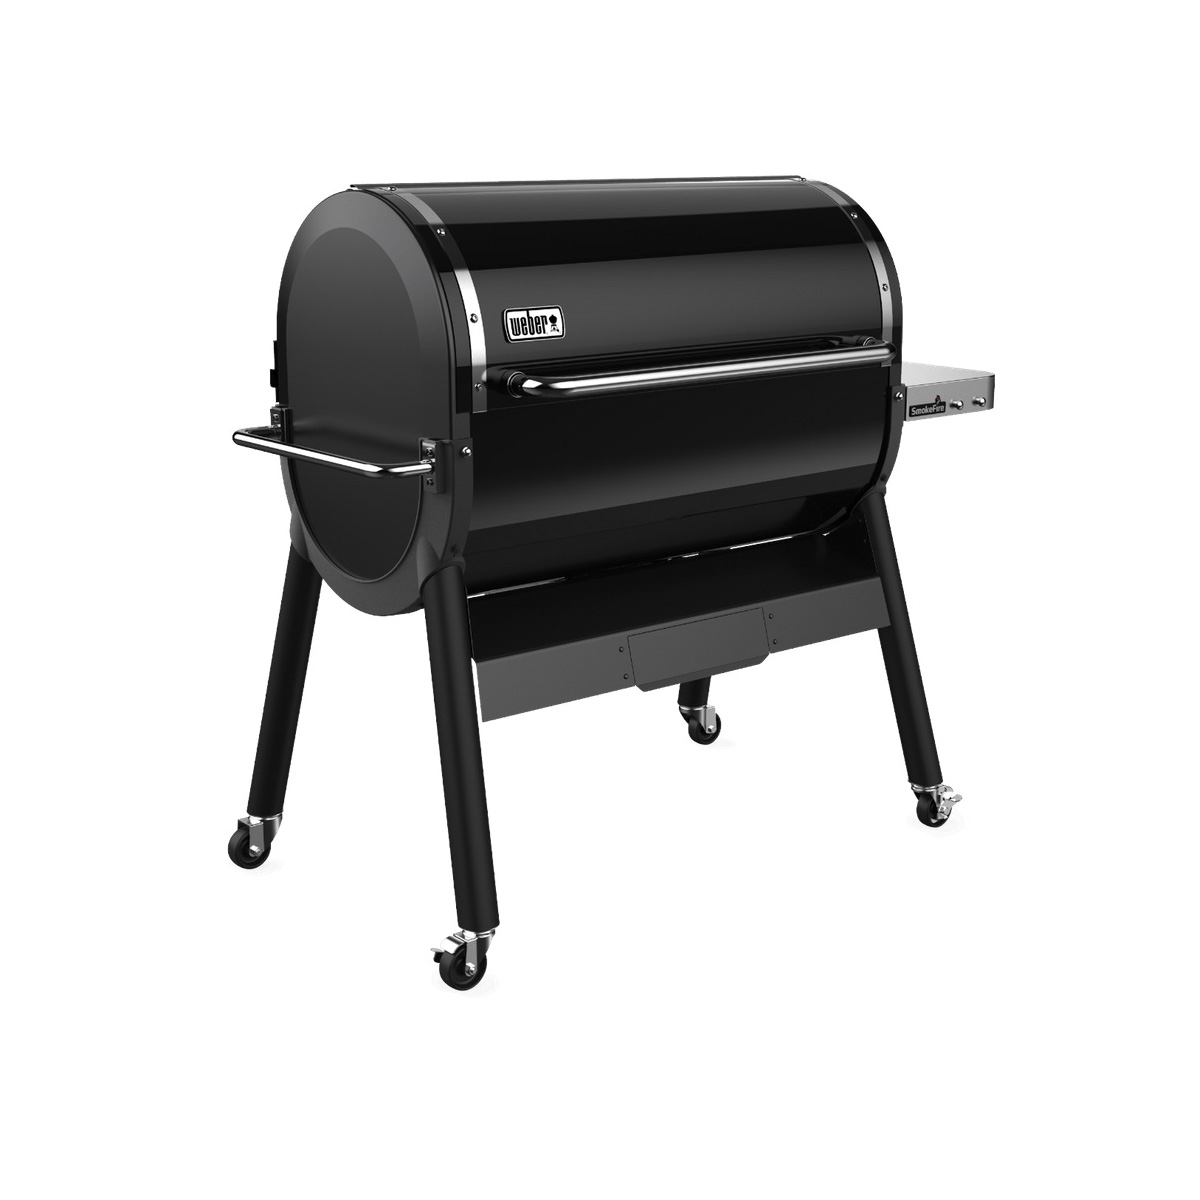 Weber SmokeFire 23510001 Pellet Grill, 1008 sq-in Primary Cooking Surface, Side Shelf Included: Yes, Steel Body, Black - 3